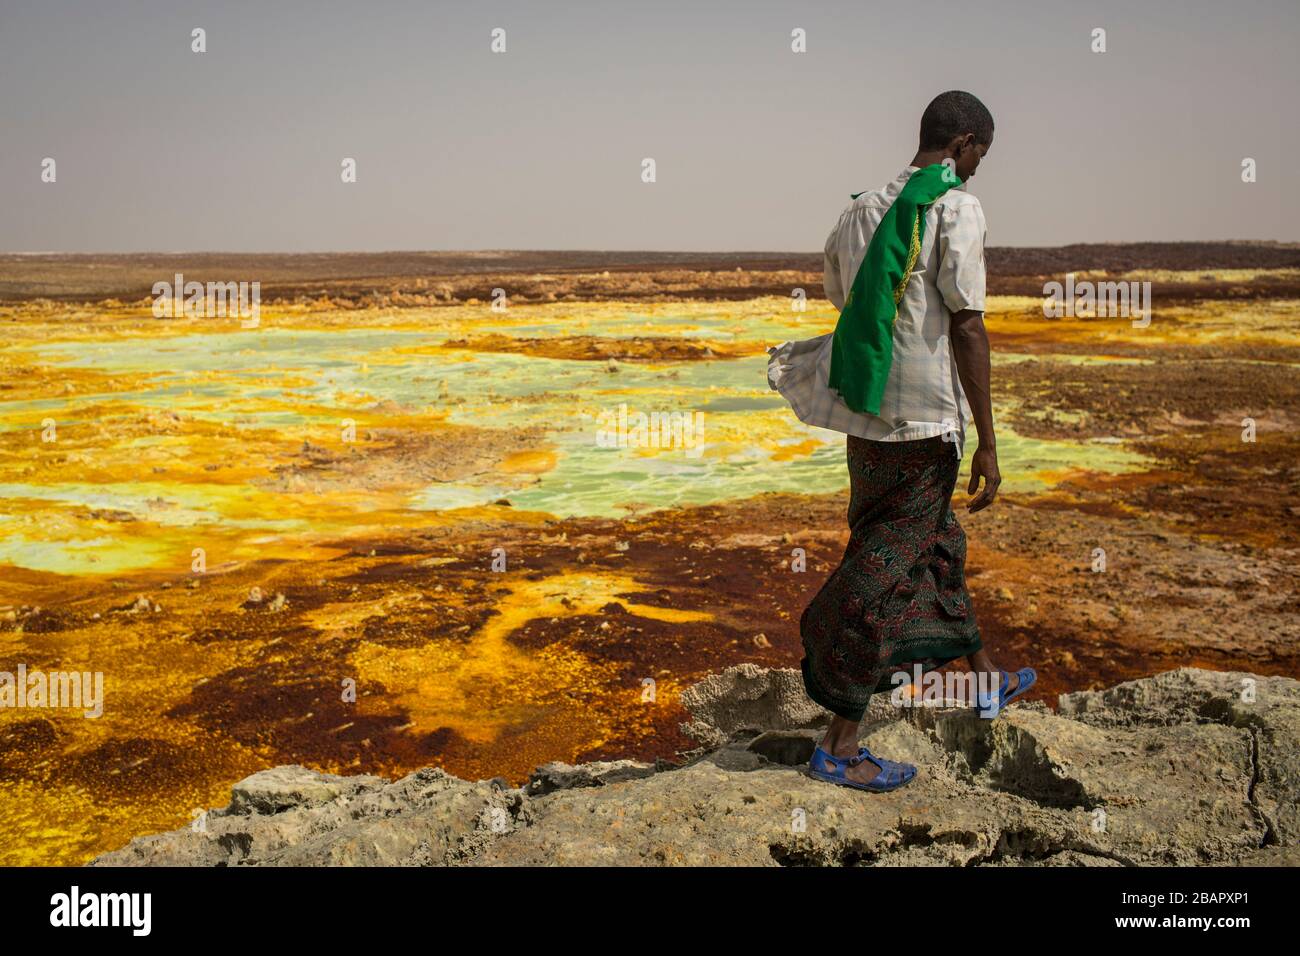 A man walks on sulphur and mineral salt formations near Dallol in the Danakil Depression, northern Ethiopia April 22, 2013. Stock Photo